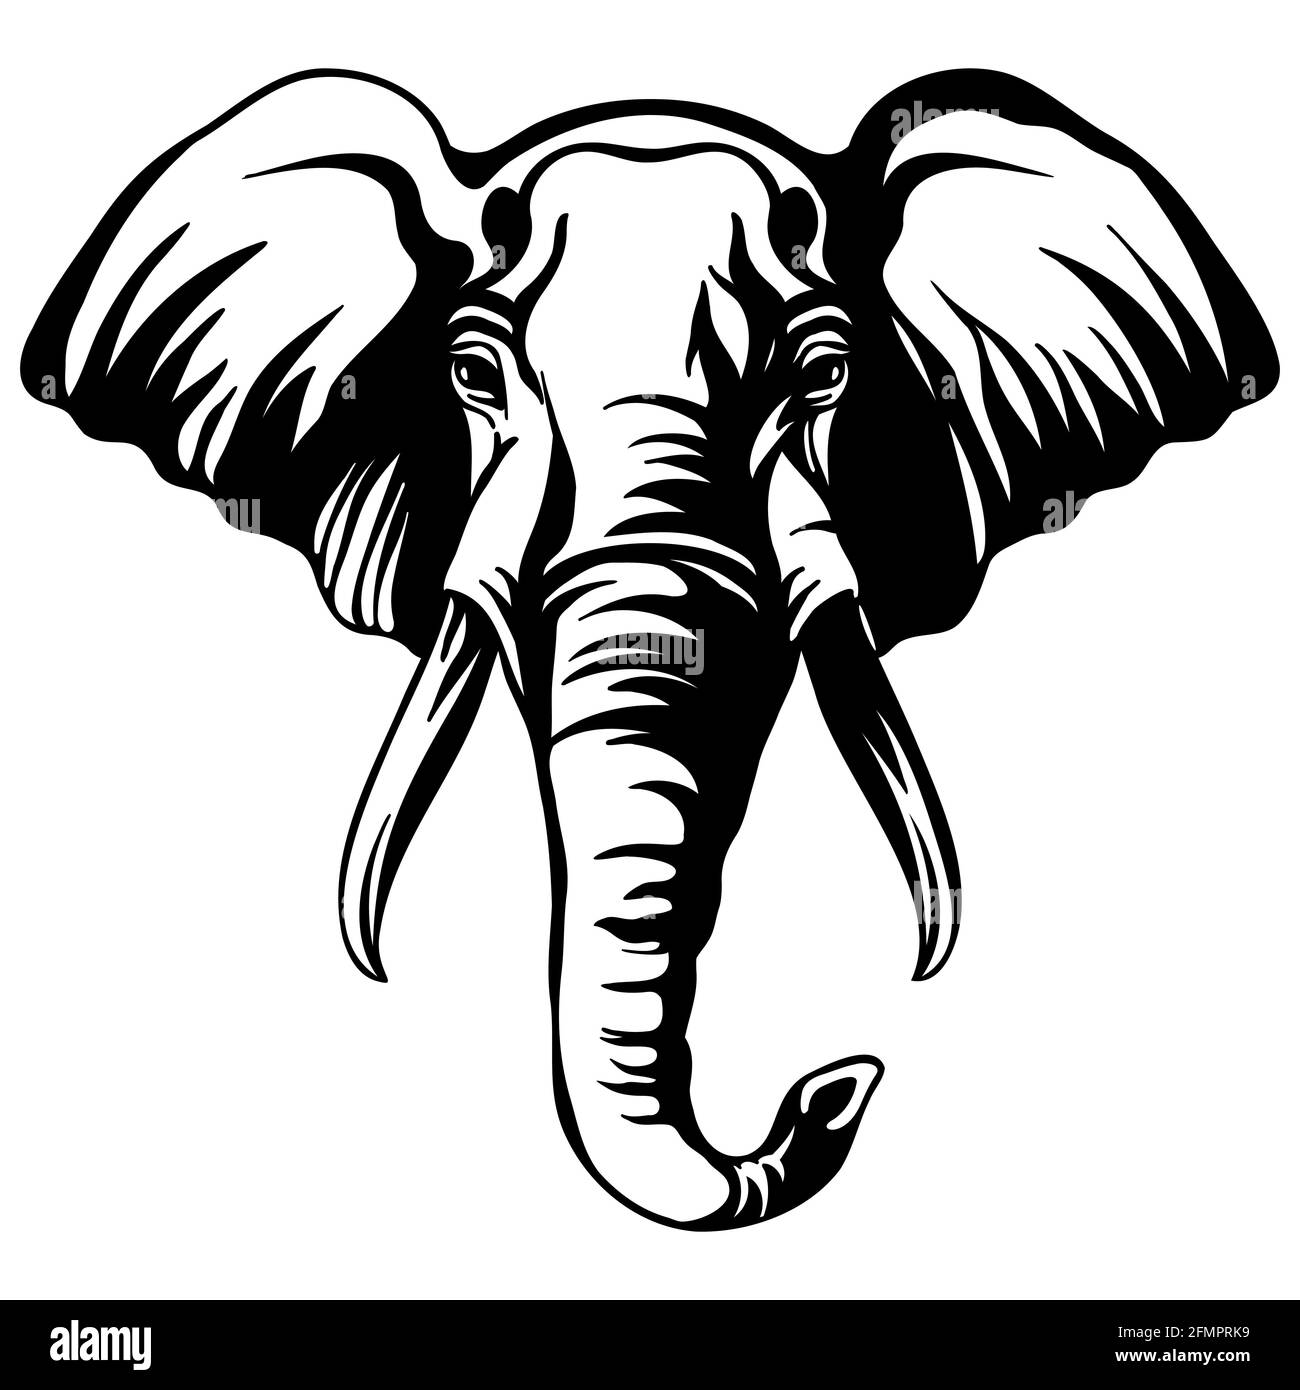 Mascot. Head of elephant. Vector illustration black color front view of